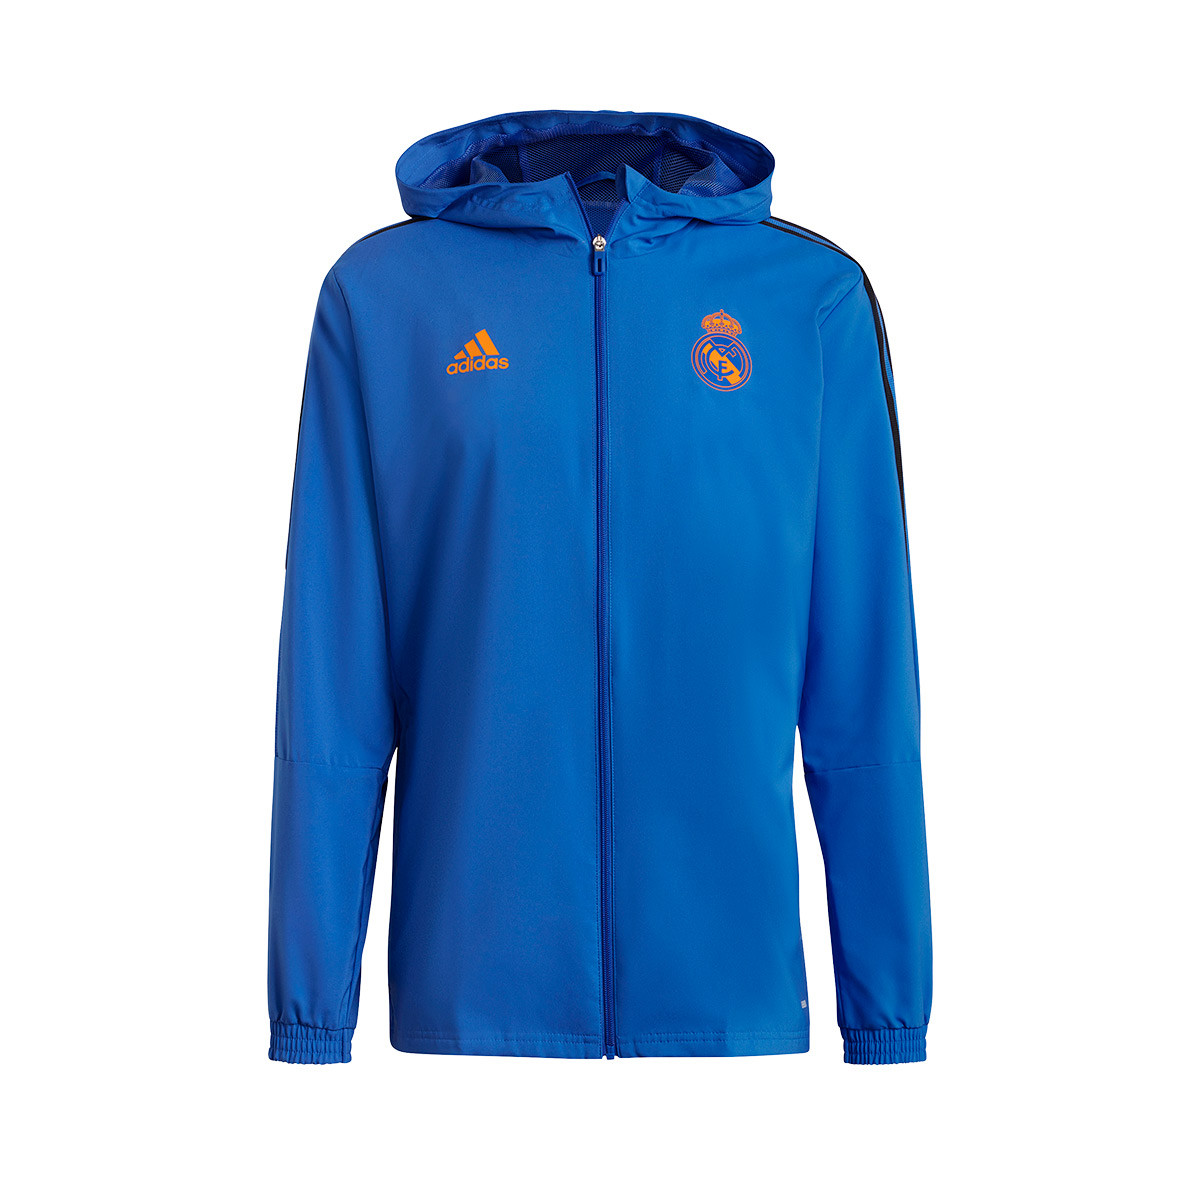 Mens Long Sleeve Hooded Top Official Real Madrid C.F 